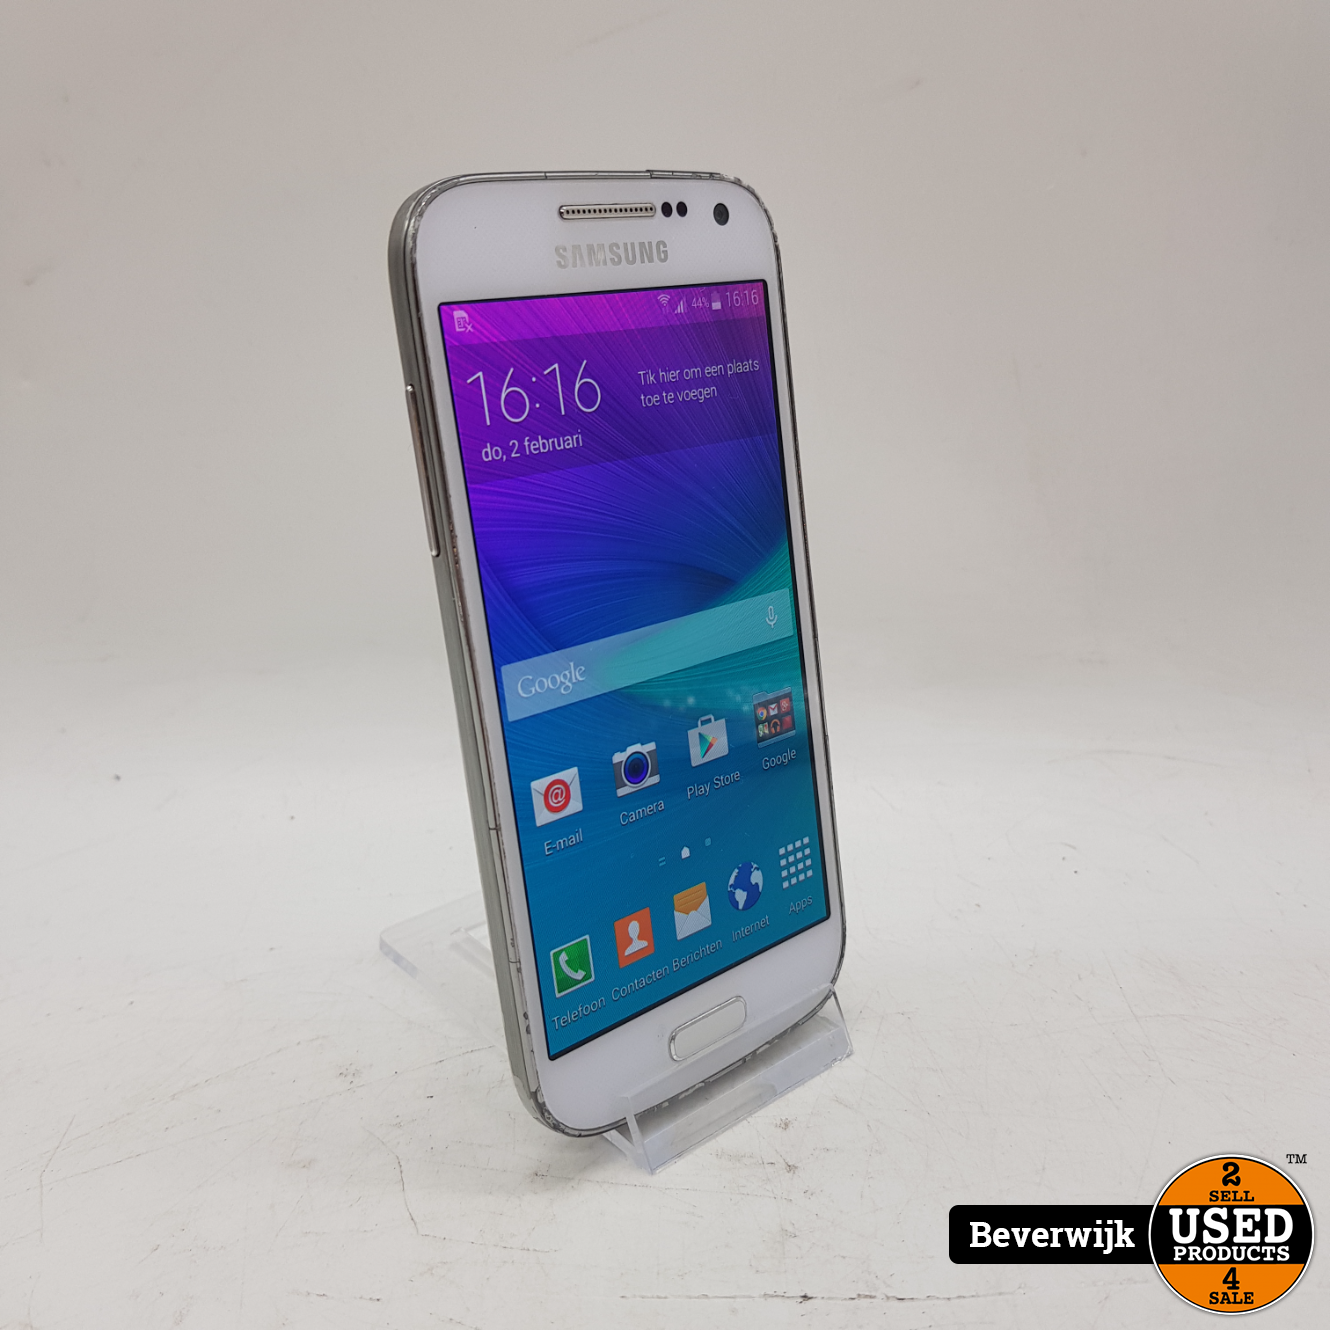 Discreet Museum rekruut Samsung Galaxy S4 Mini 8GB Android 4 - In Goede Staat - Used Products  Beverwijk